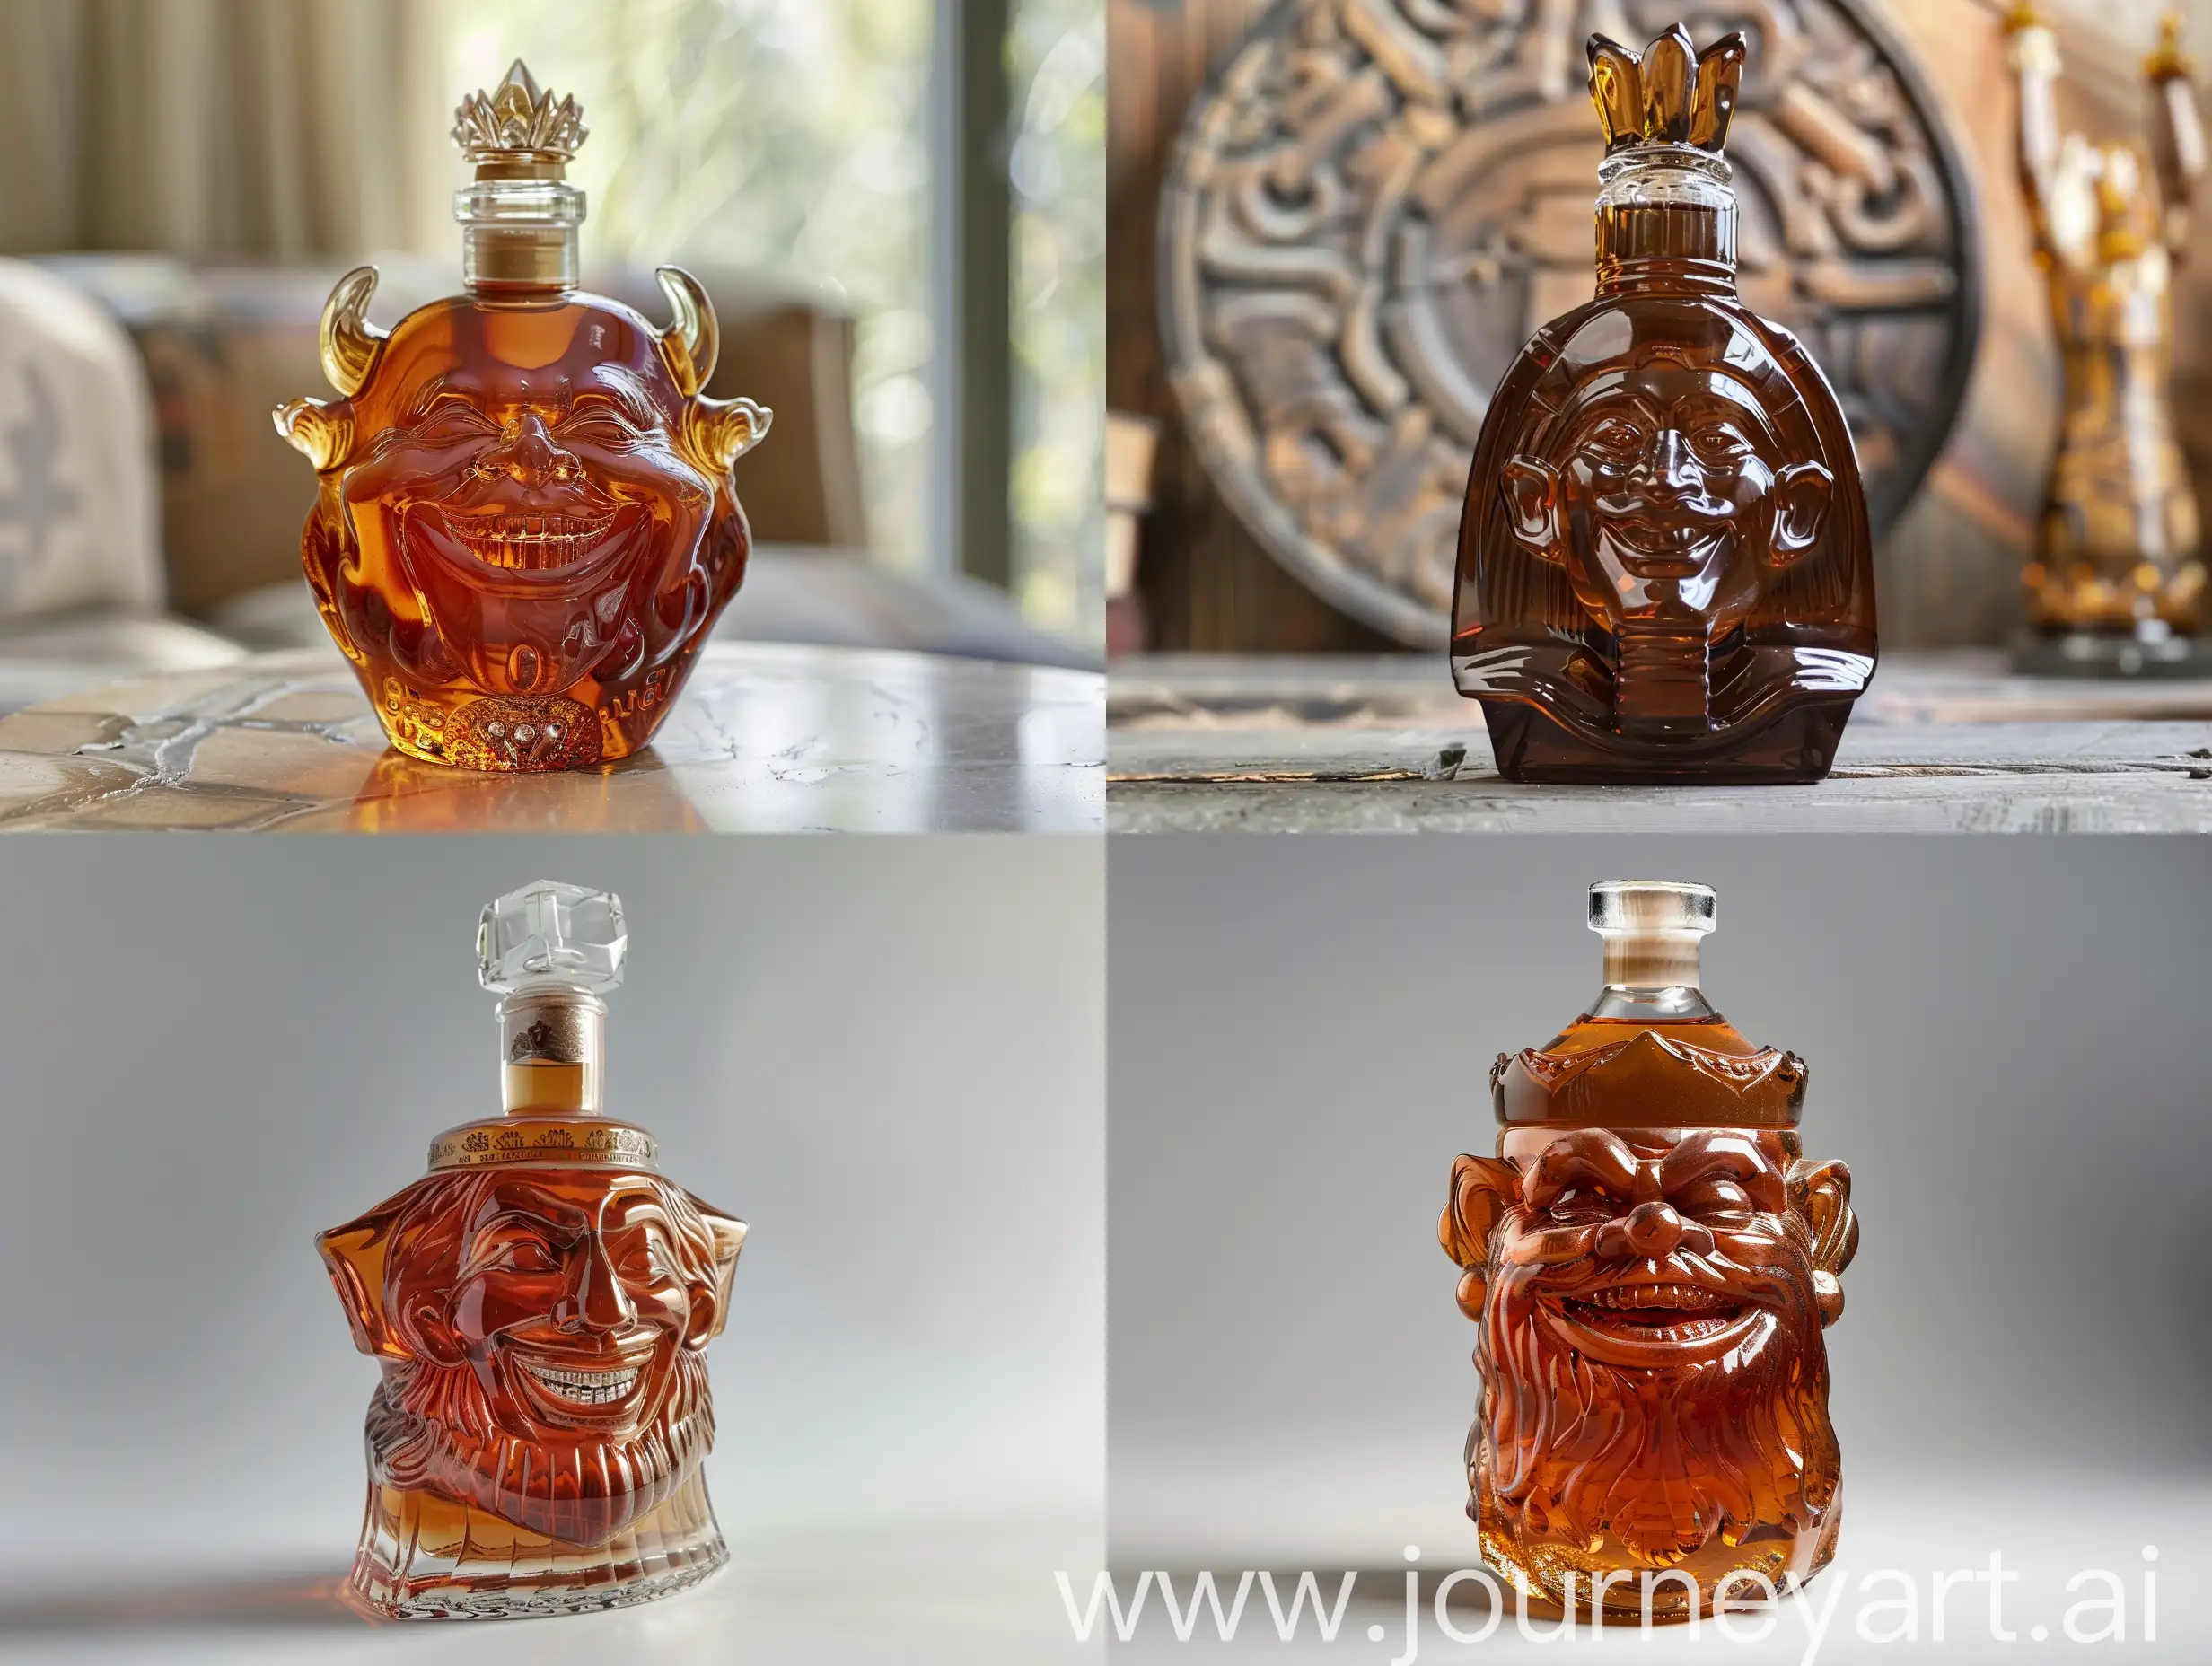 A bottle of cognac, in the form of an ancient, smiling king, glass sculpture style